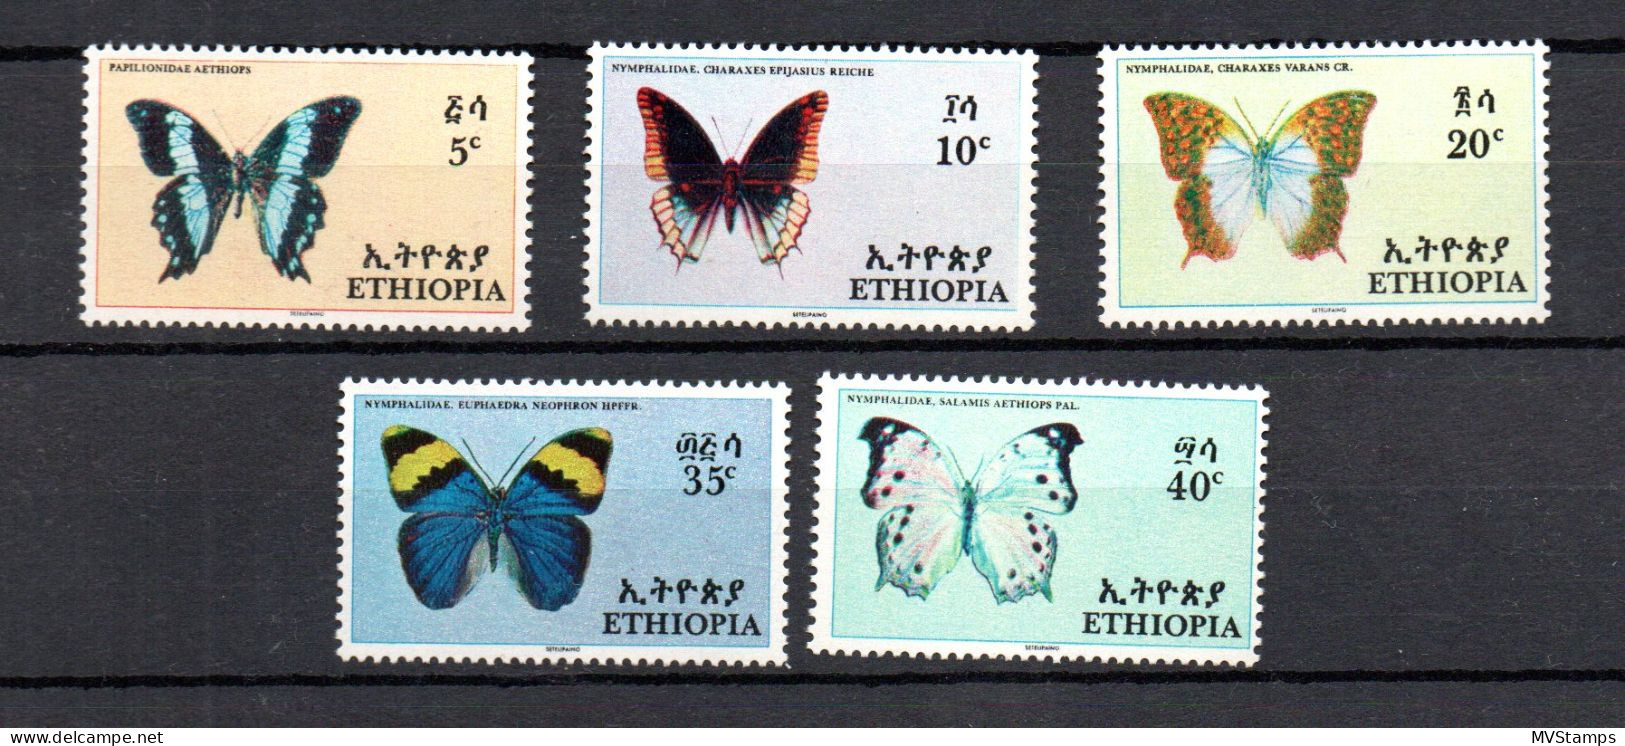 Ethiopia 1967 Set Butterfly/Schmetterlinge Stamps (Michel 555/59) Nice MNH - Ethiopia